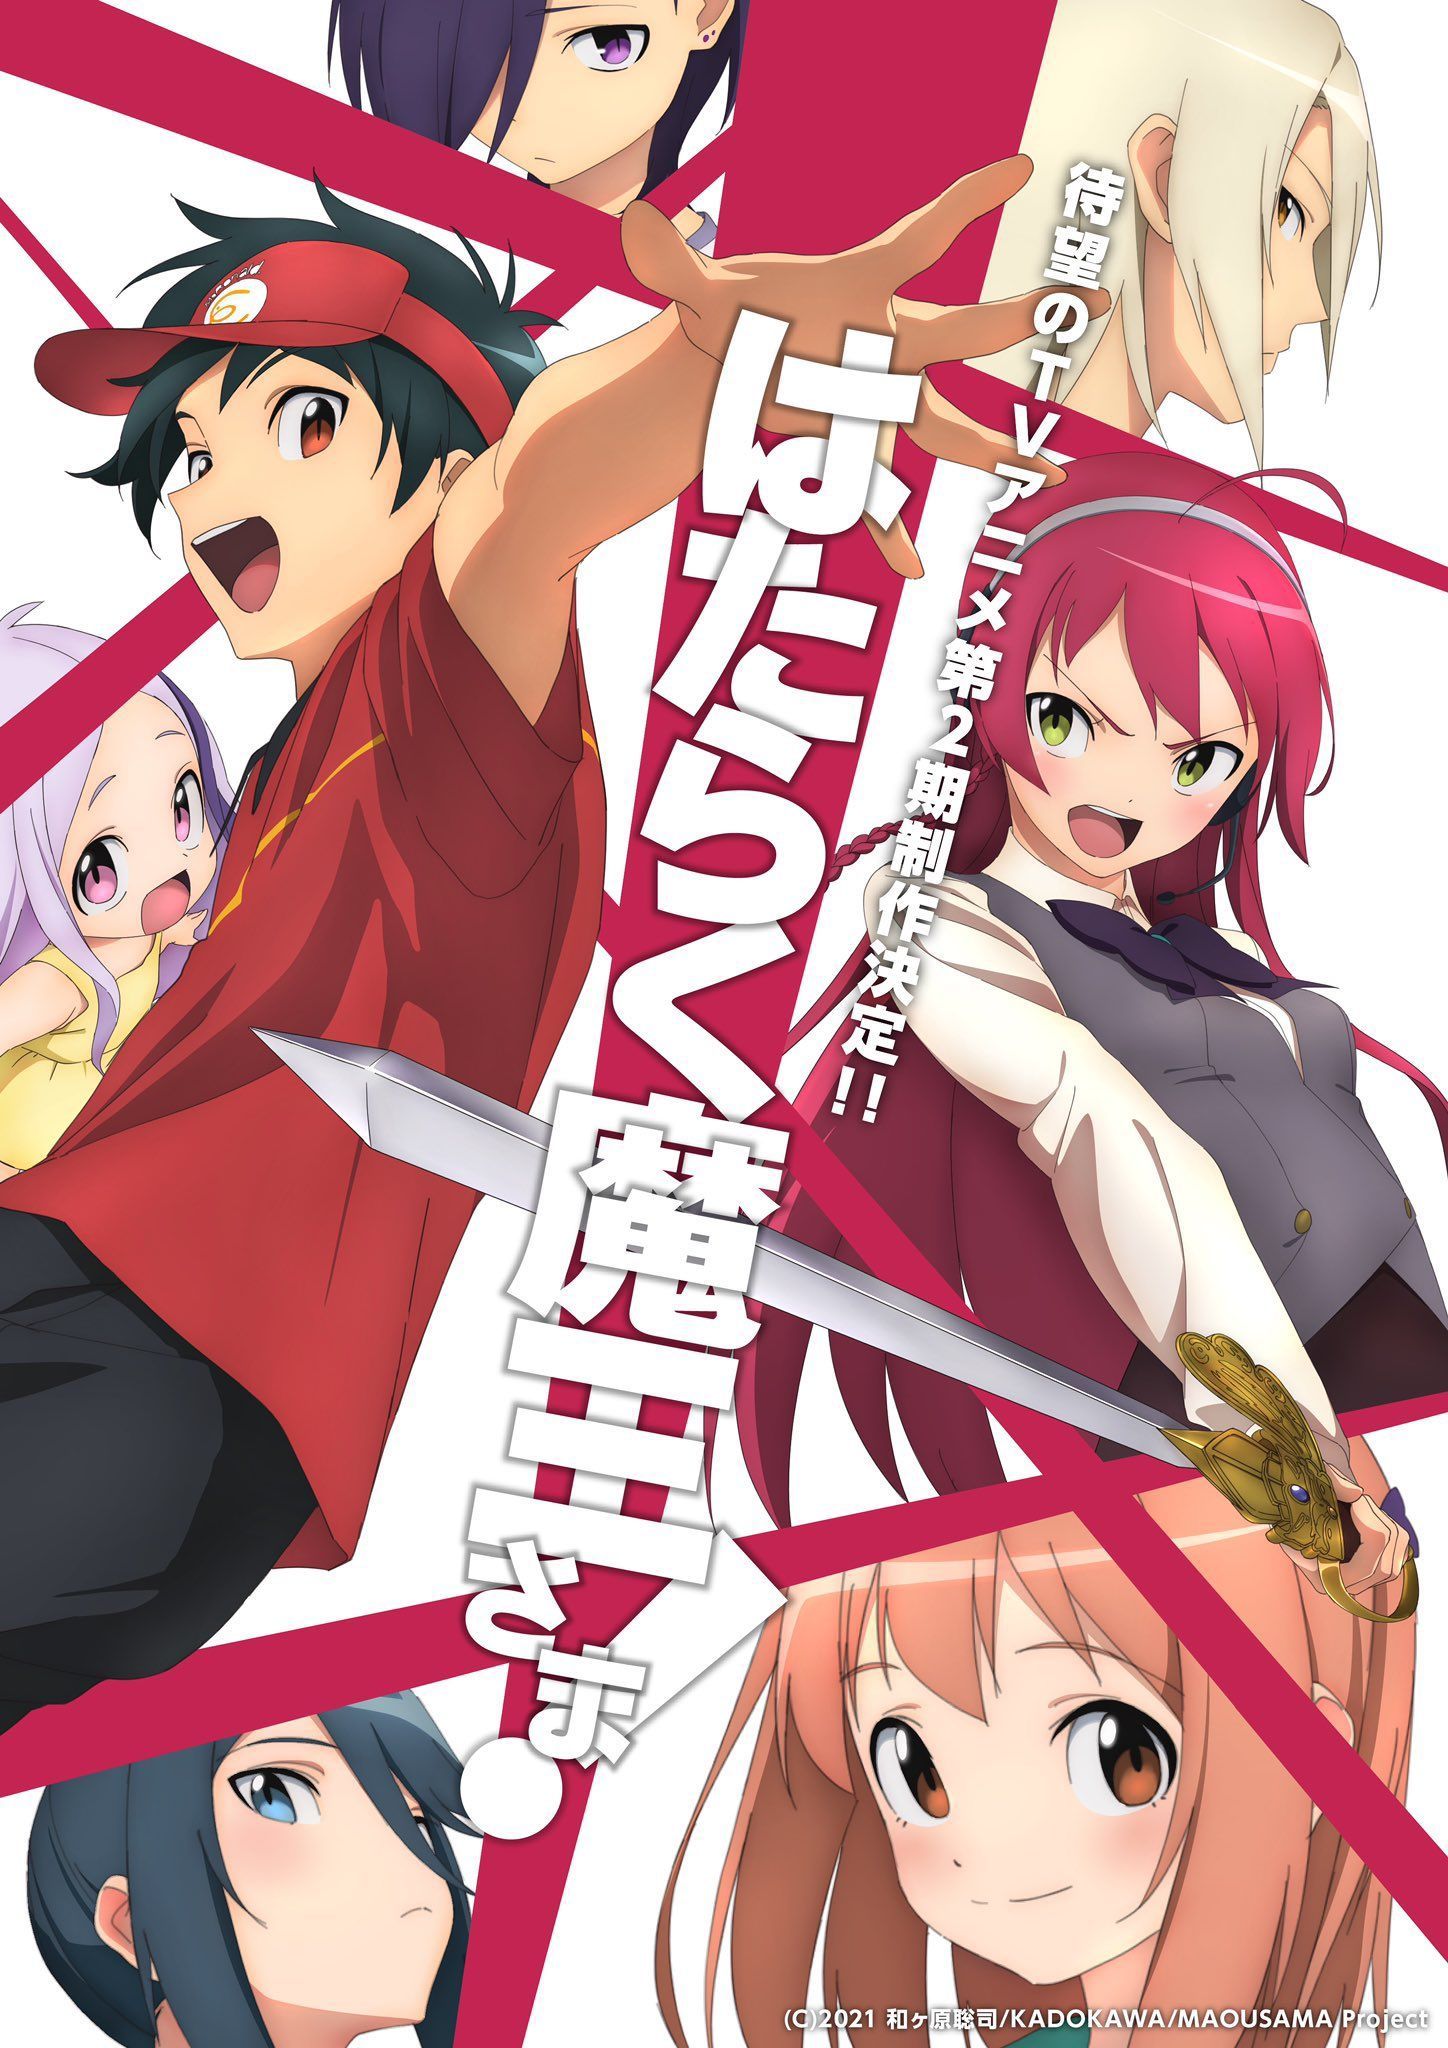 Poster of The Devil is a Part Timer anime